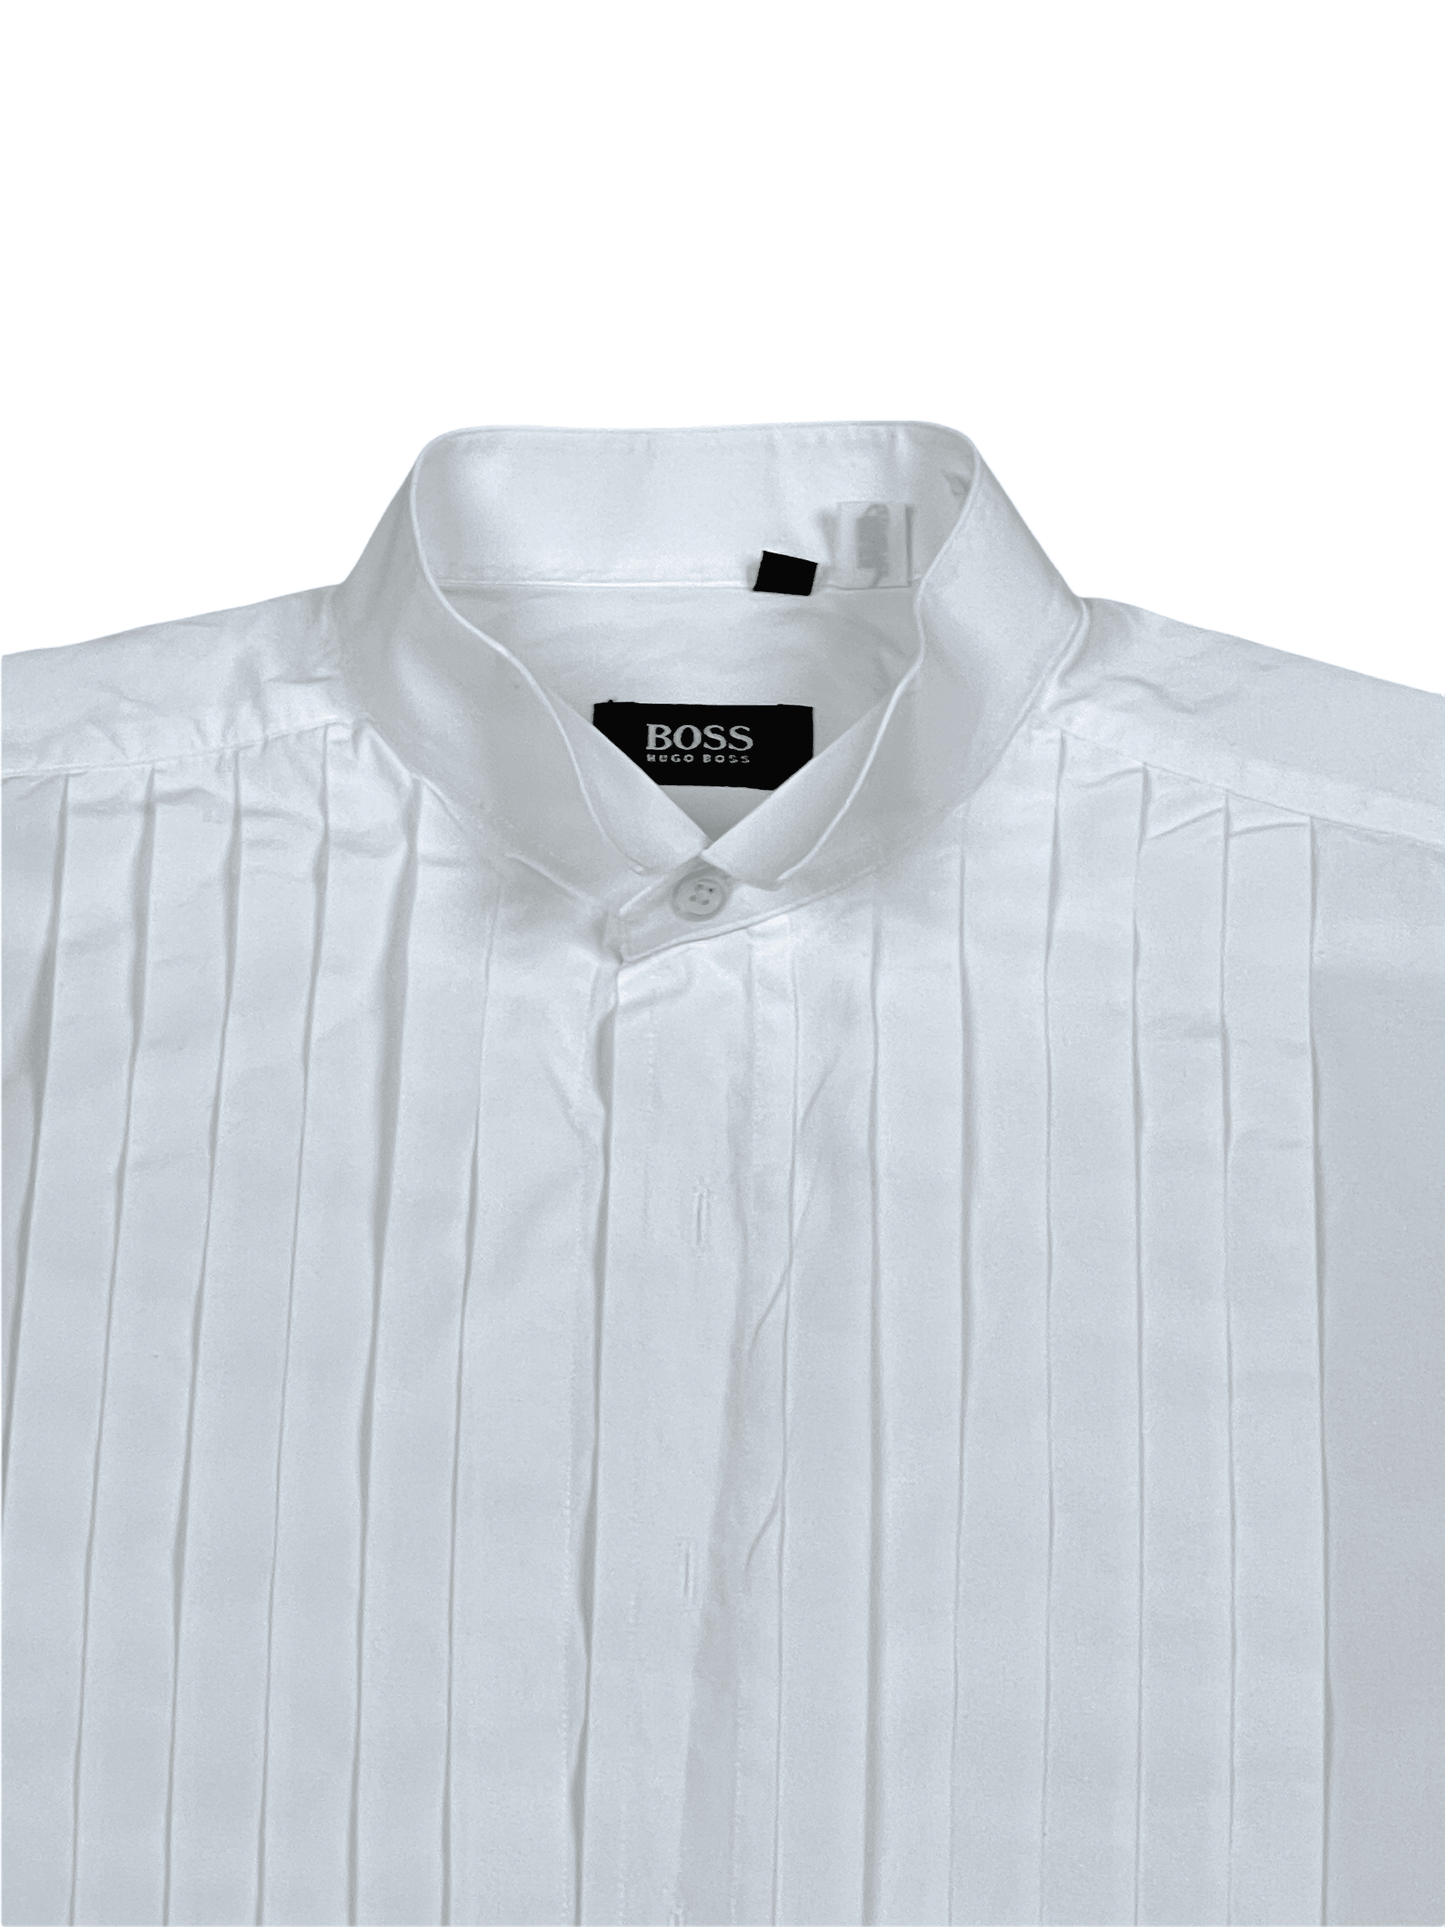 Hugo Boss White Tuxedo Shirt 16 / 41 - Genuine Design Luxury Consignment for Men. New & Pre-Owned Clothing, Shoes, & Accessories. Calgary, Canada